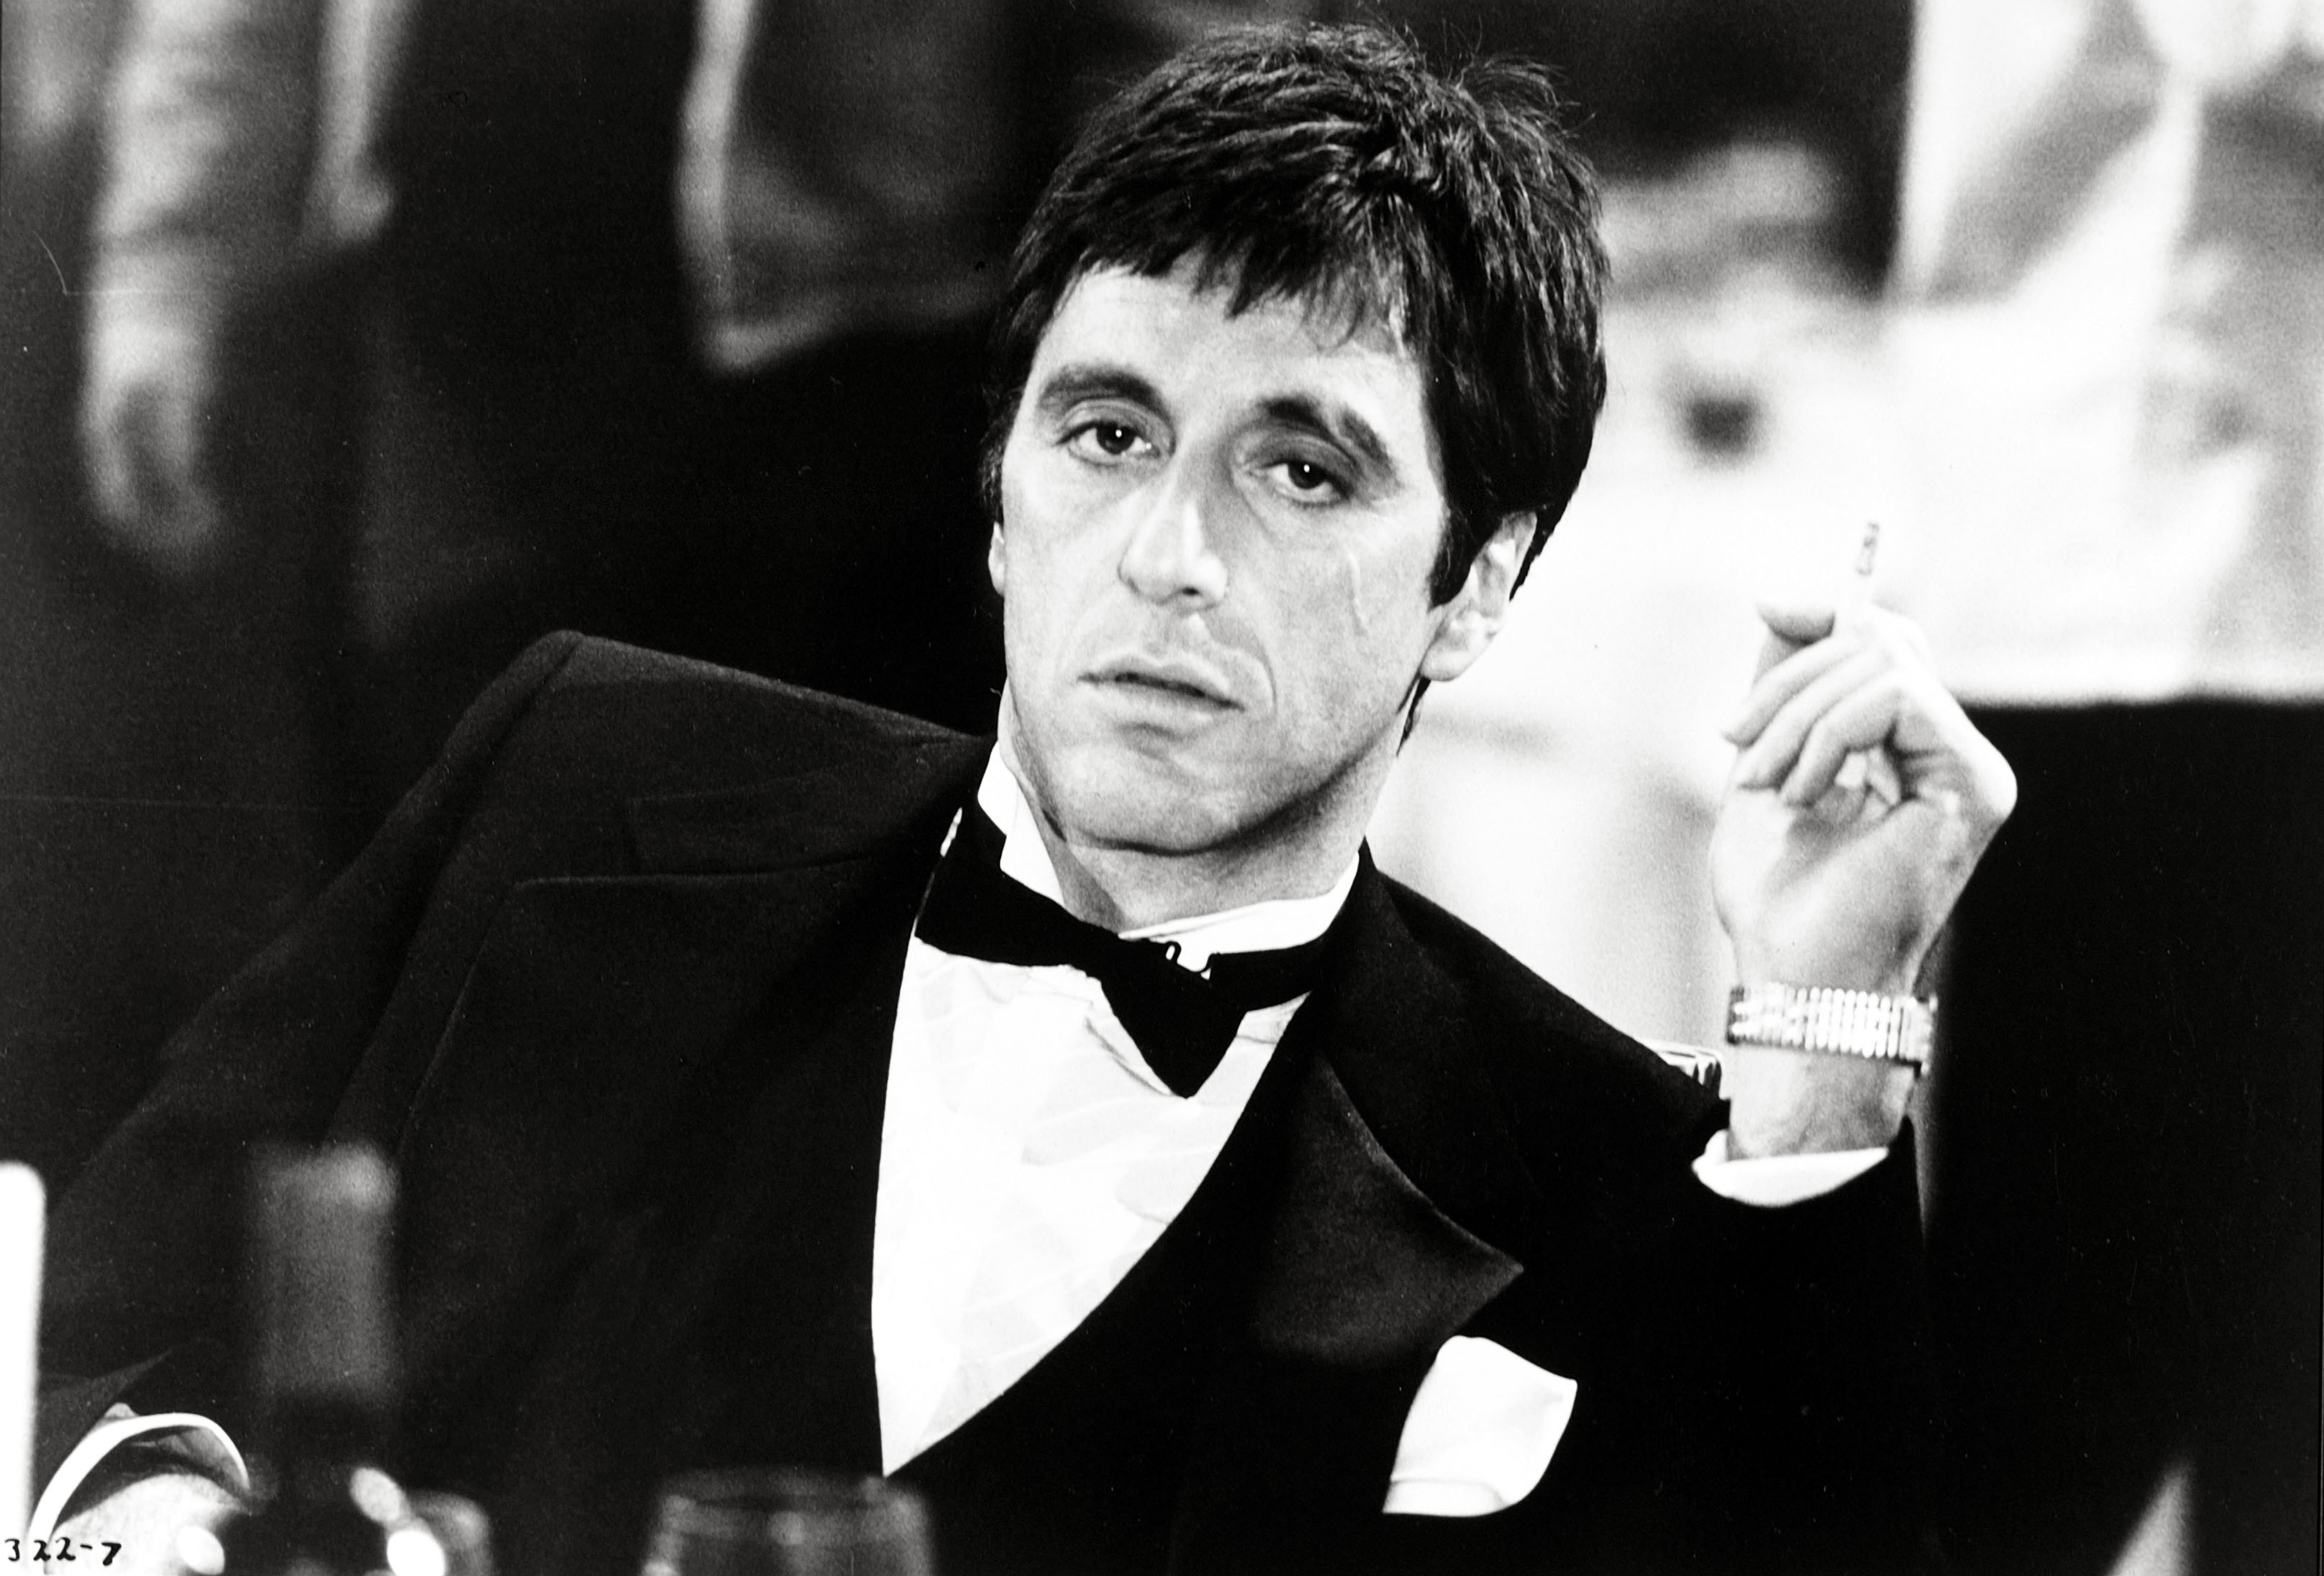 Movie Scarface HD Wallpaper | Background Image